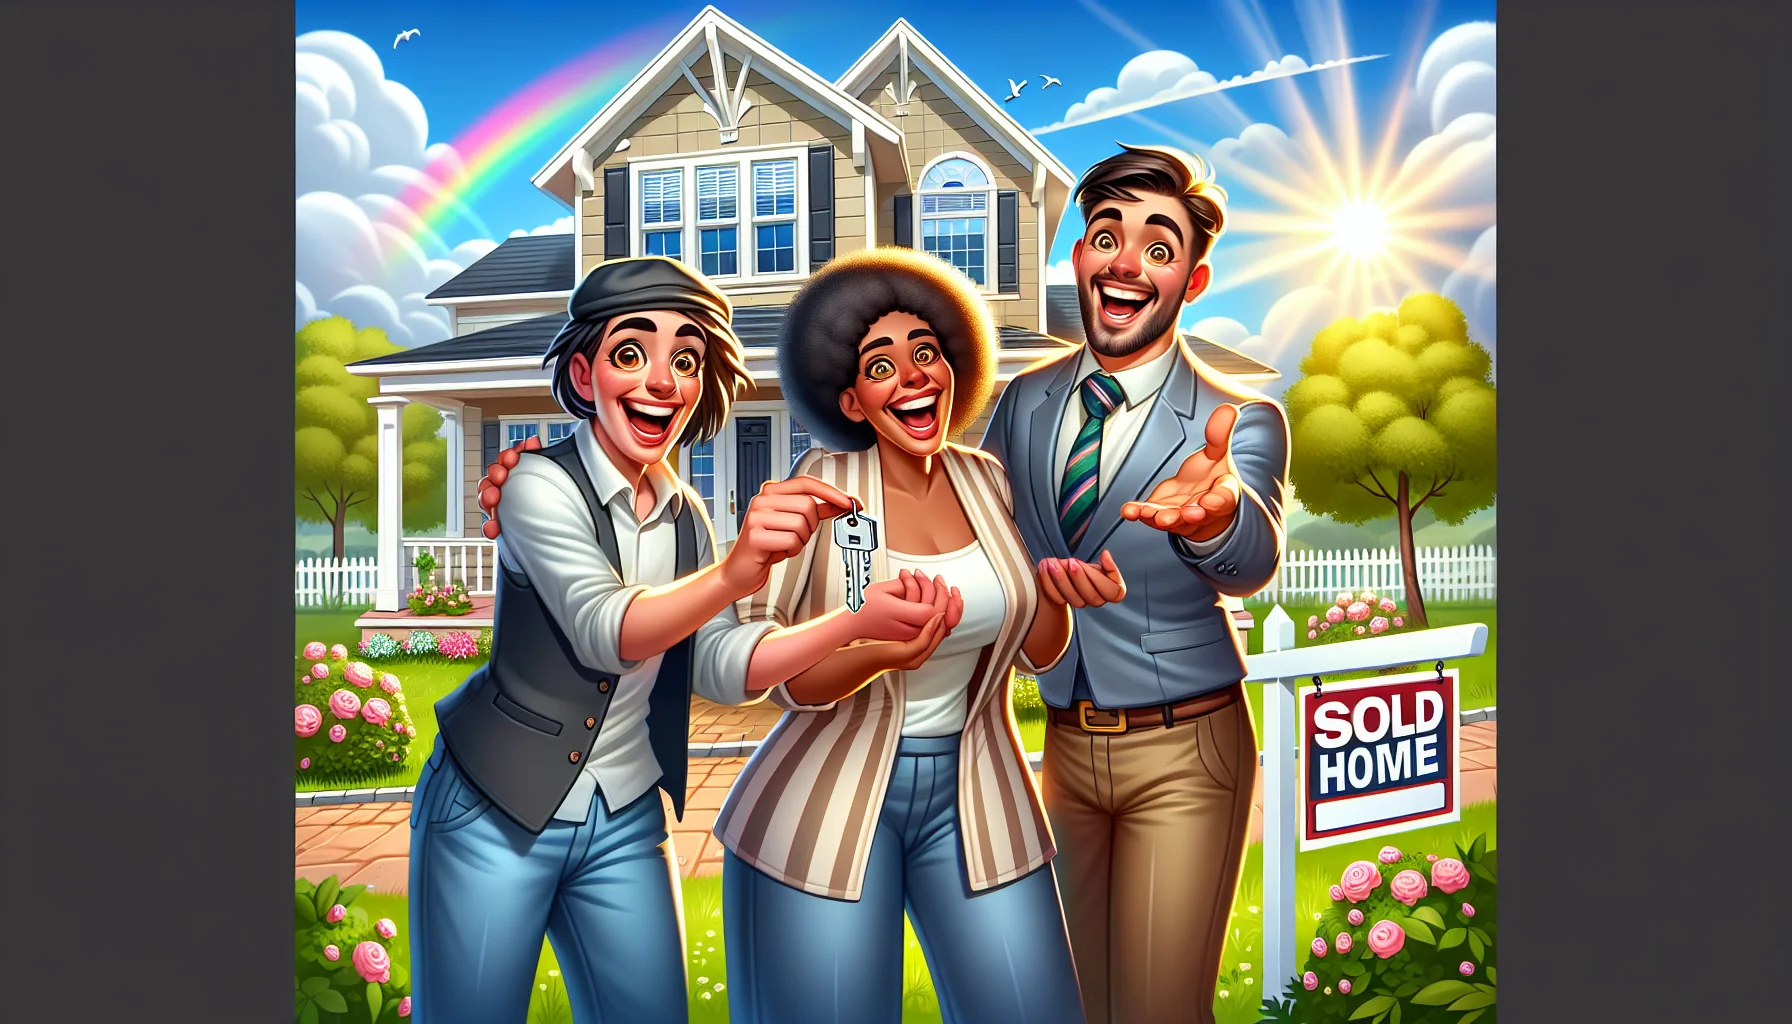 Imagine a charming scene of local home buyers experiencing the ideal real estate scenario. In this jovial landscape, a diverse trio is present: a Middle-Eastern woman, a Black man, and a South Asian man. They are wide-eyed and exuberant, standing outside a remarkably beautiful suburban home with a sold sign in the front yard. Their real estate agent, a jubilant Caucasian woman, is handing them the keys. The scene is filled with sunshine, a rainbow in the clear sky, and a white picket fence adorned with blooming roses. The expressions of pure joy on their faces capture the perfect moment of home buying.